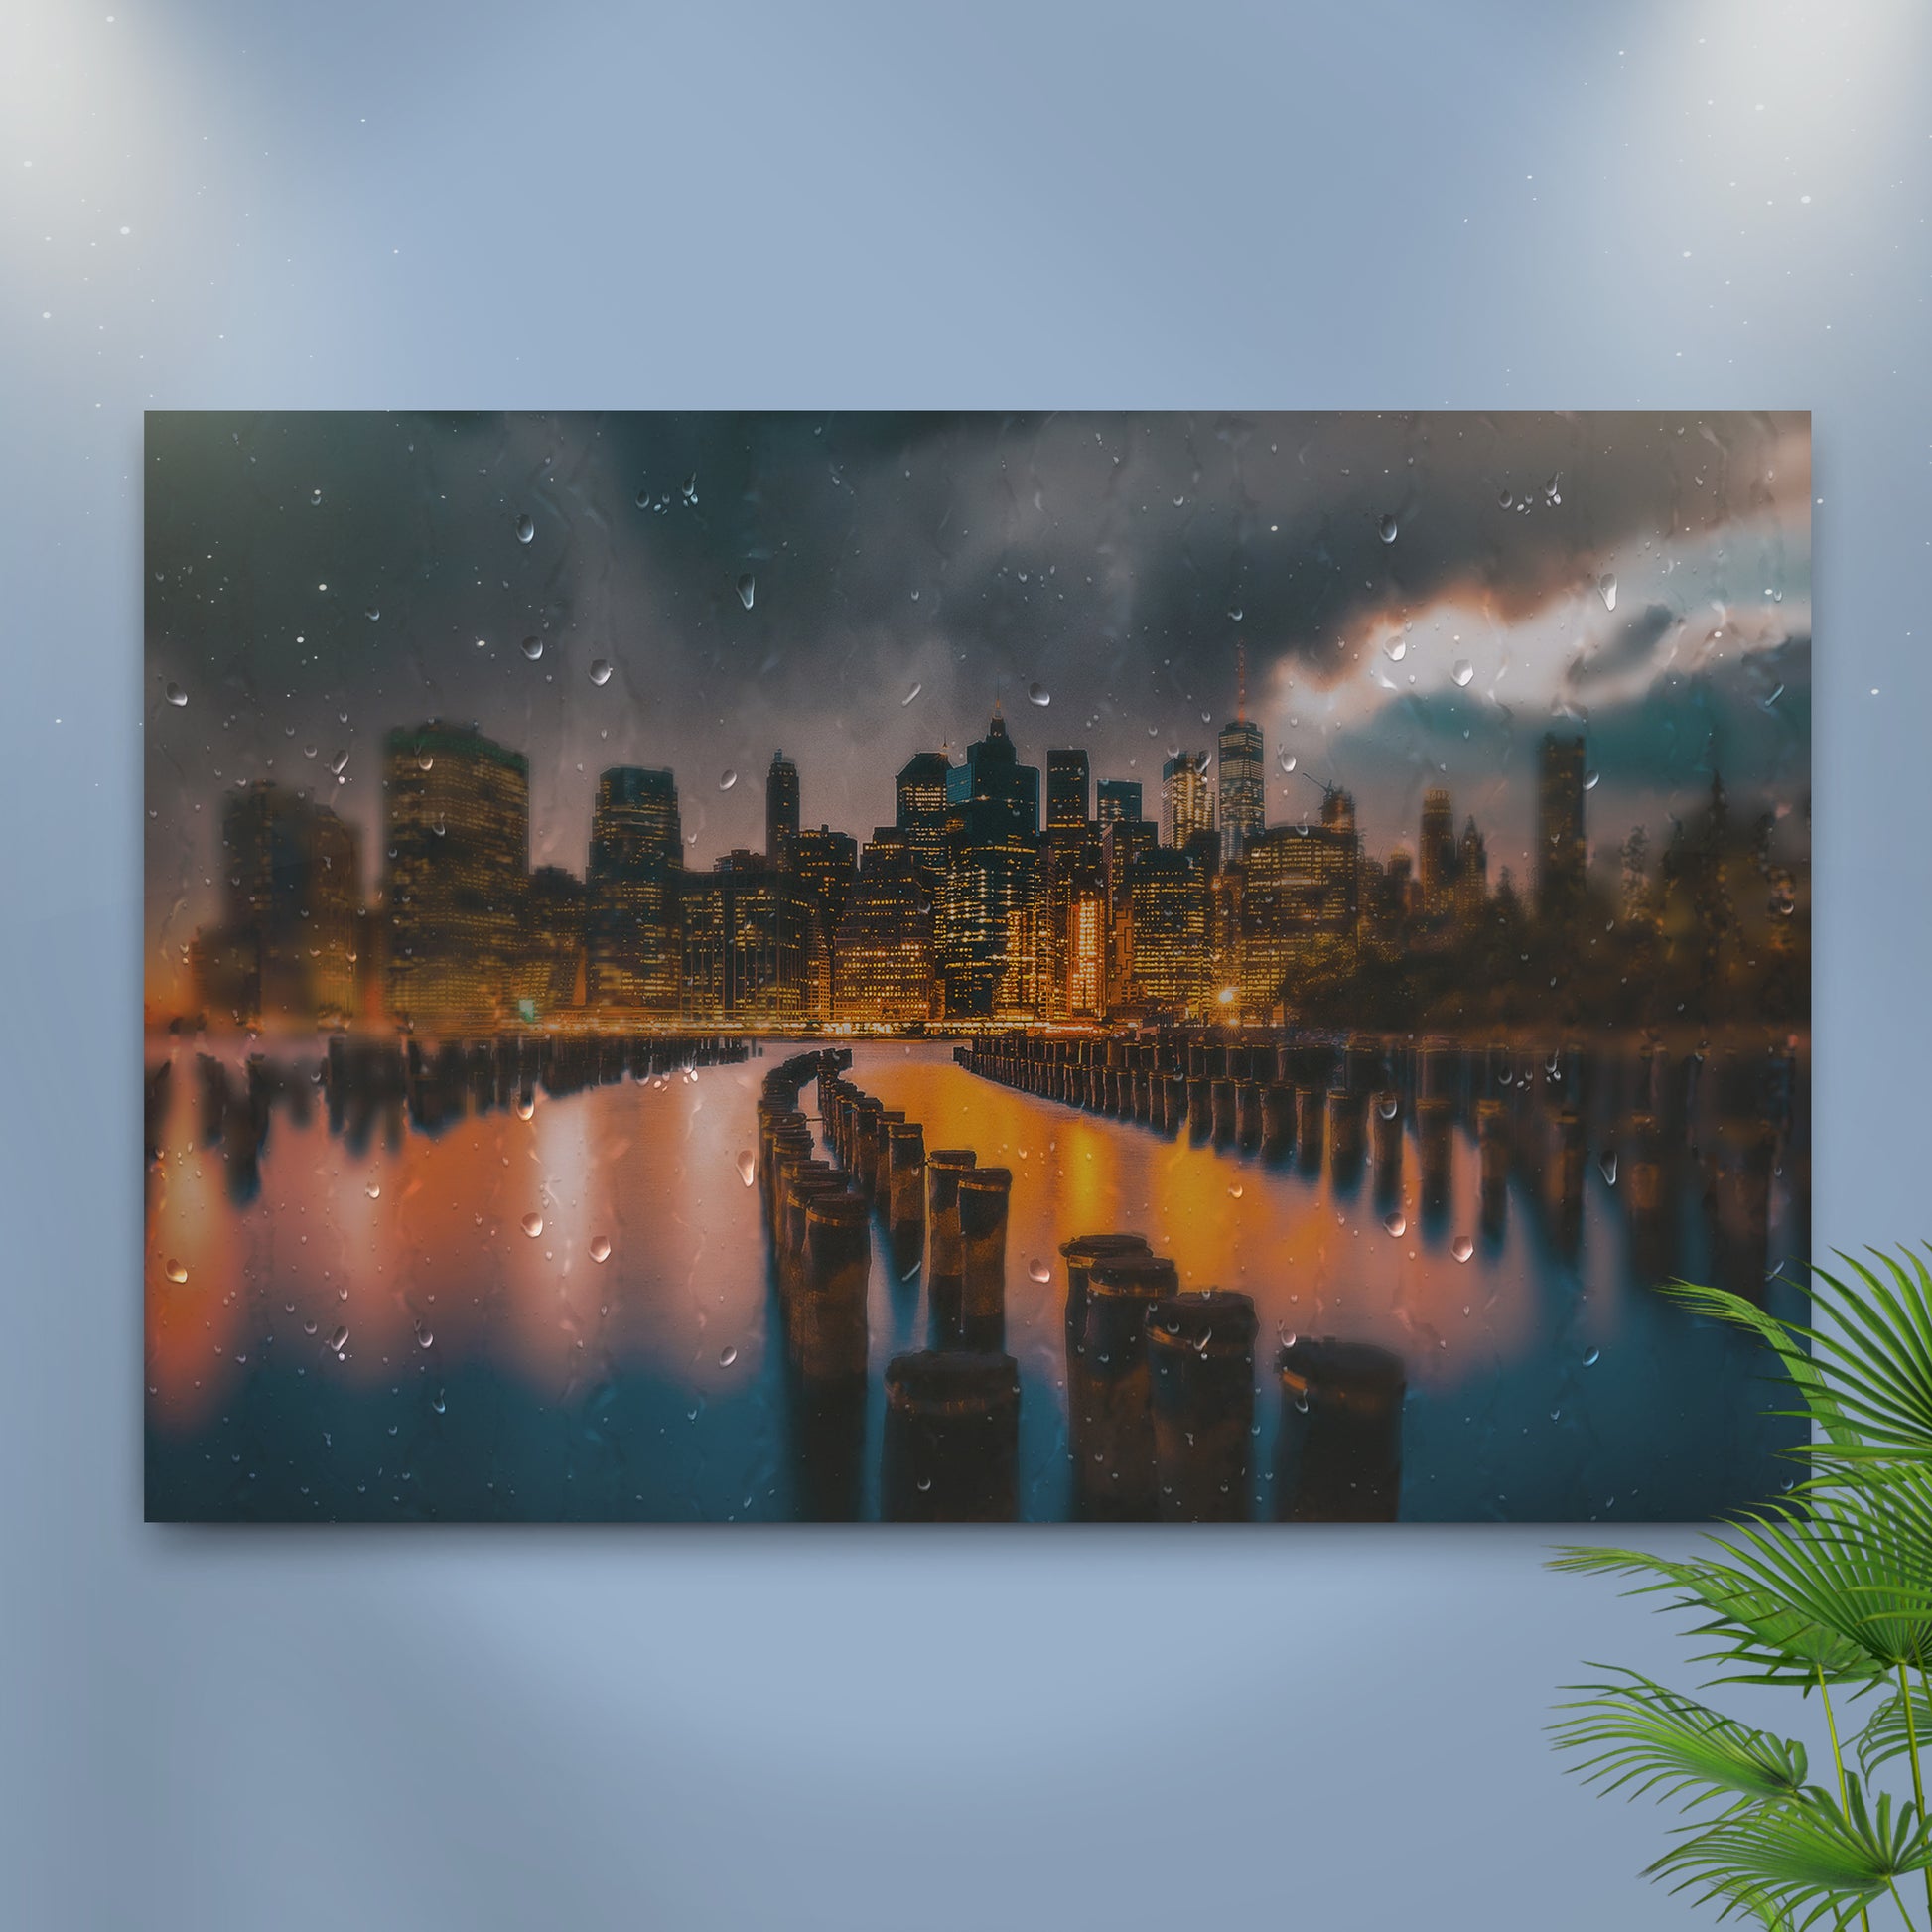 Rainy City Skyline Canvas Wall Art - Image by Tailored Canvases